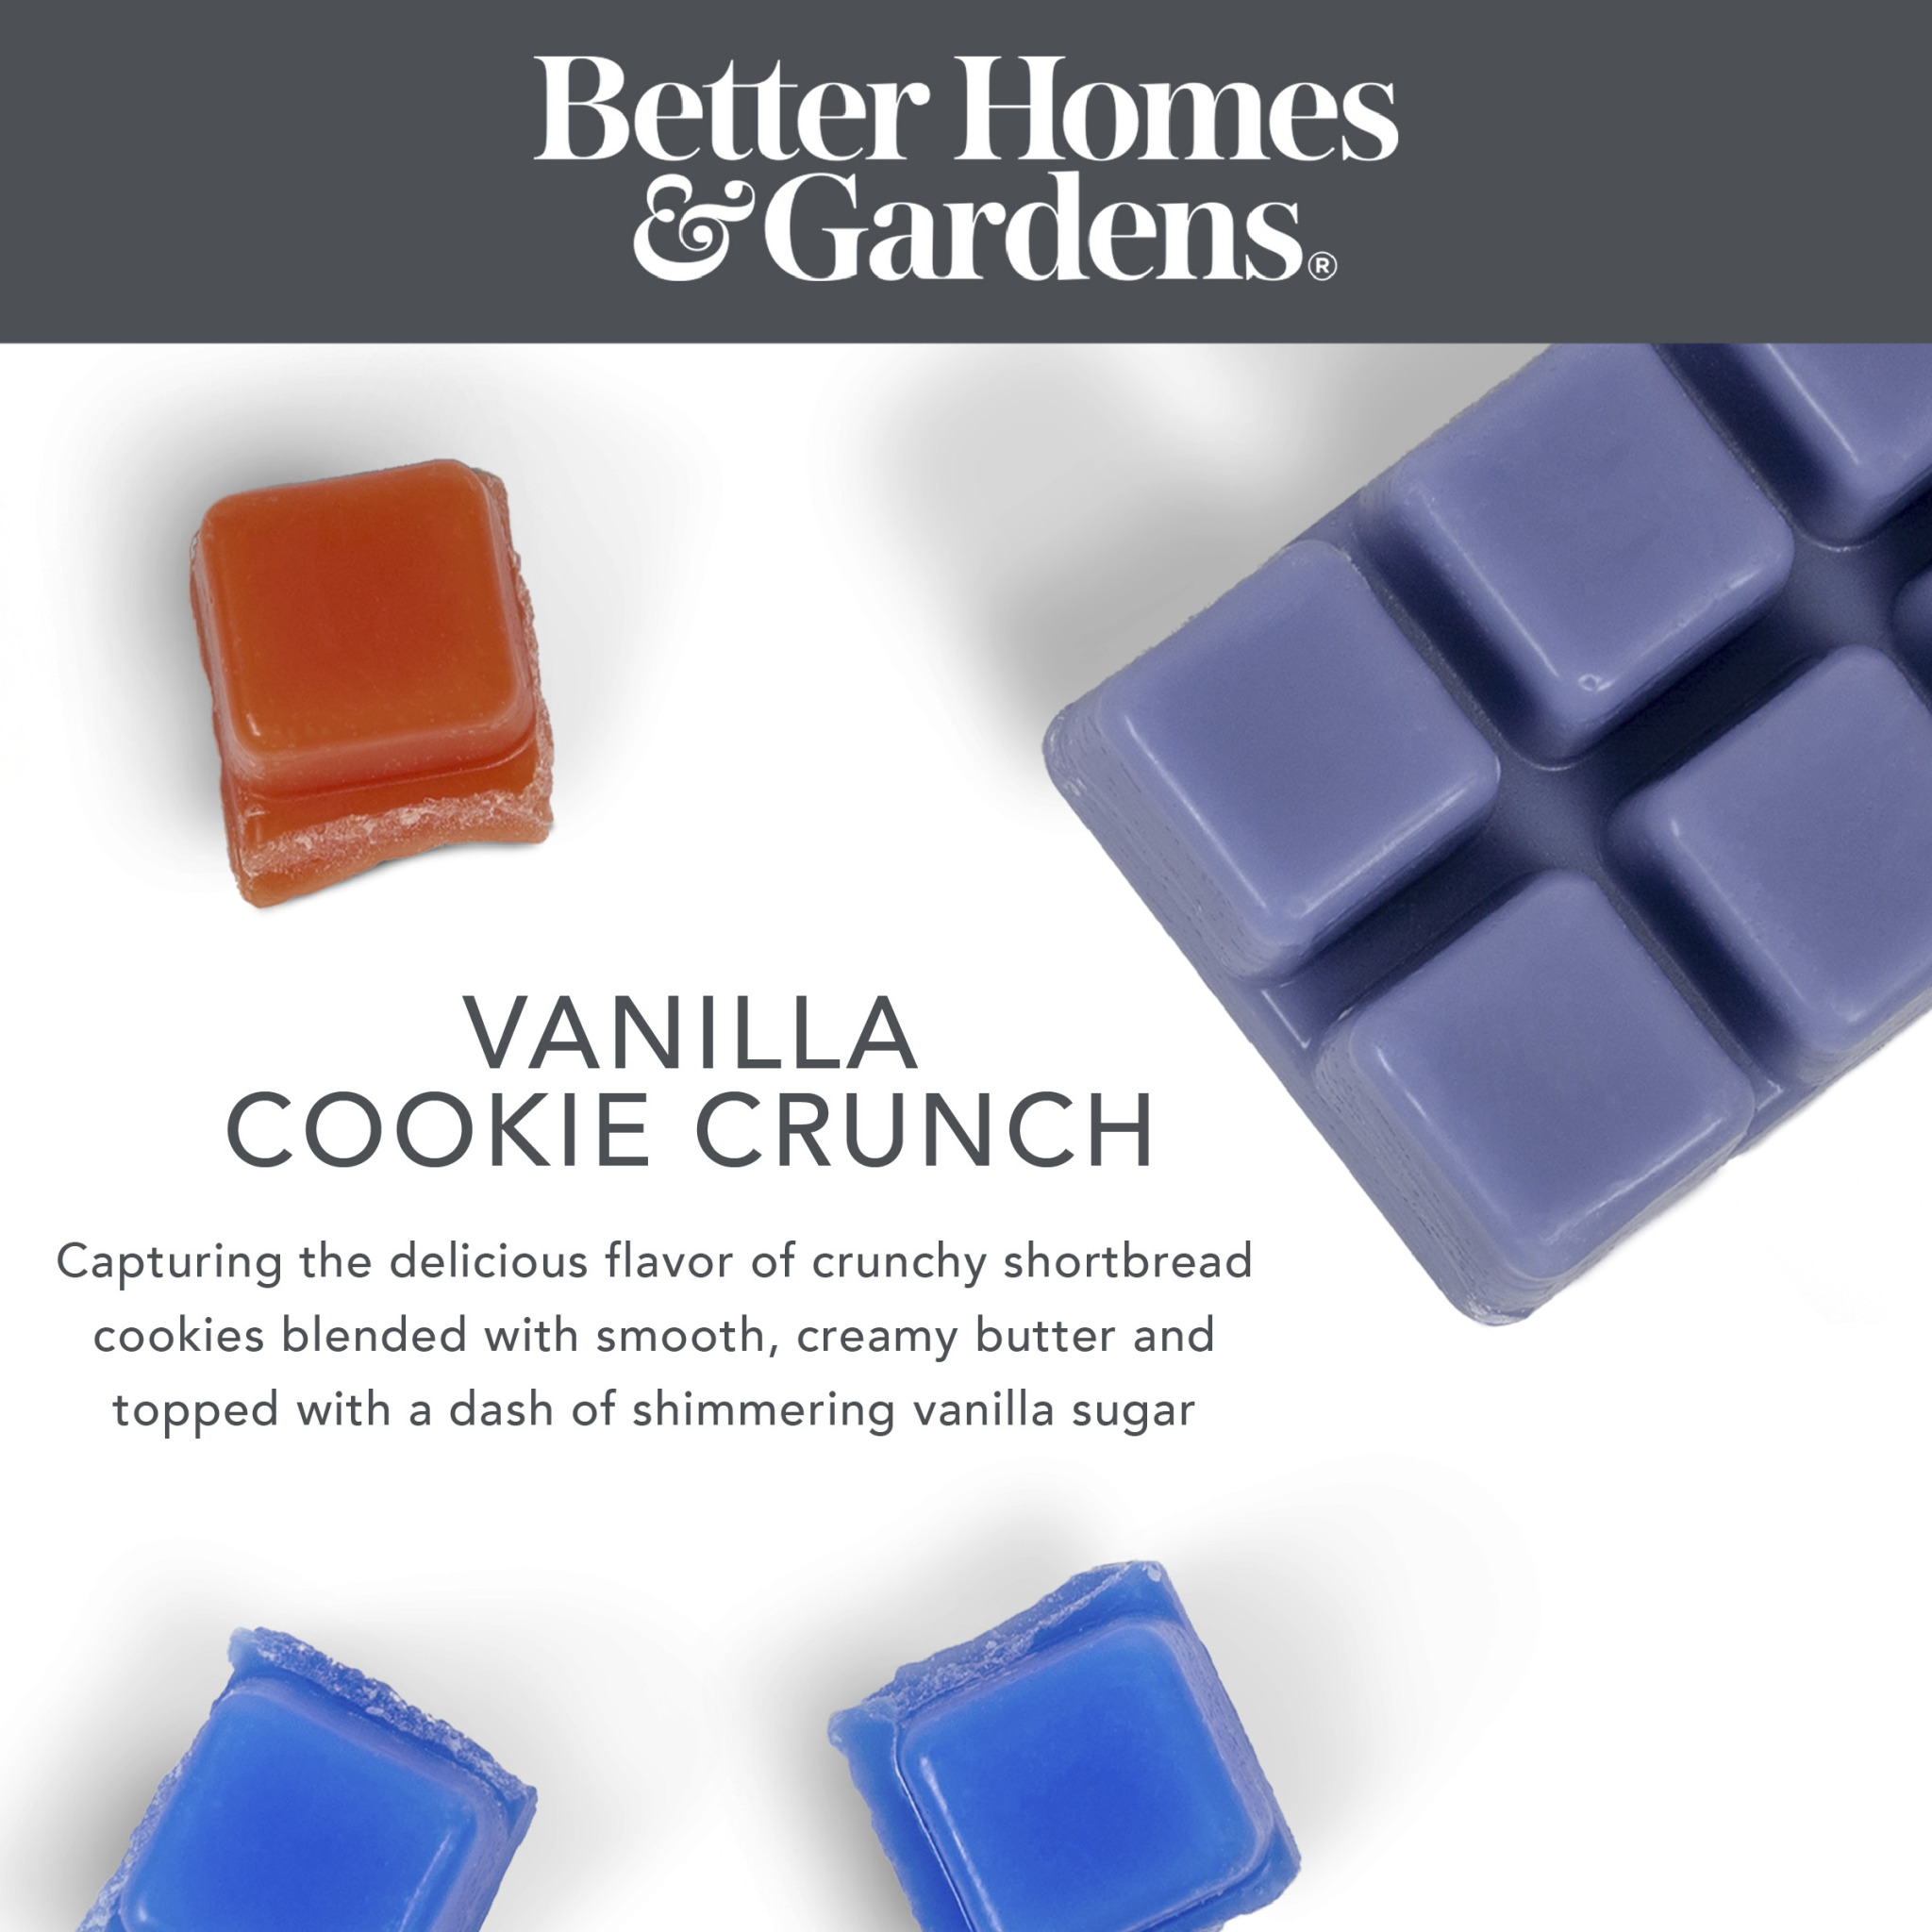 Vanilla Cookie Crunch Scented Wax Melts, Better Homes & Gardens, 5 oz (Value Size) - image 4 of 9